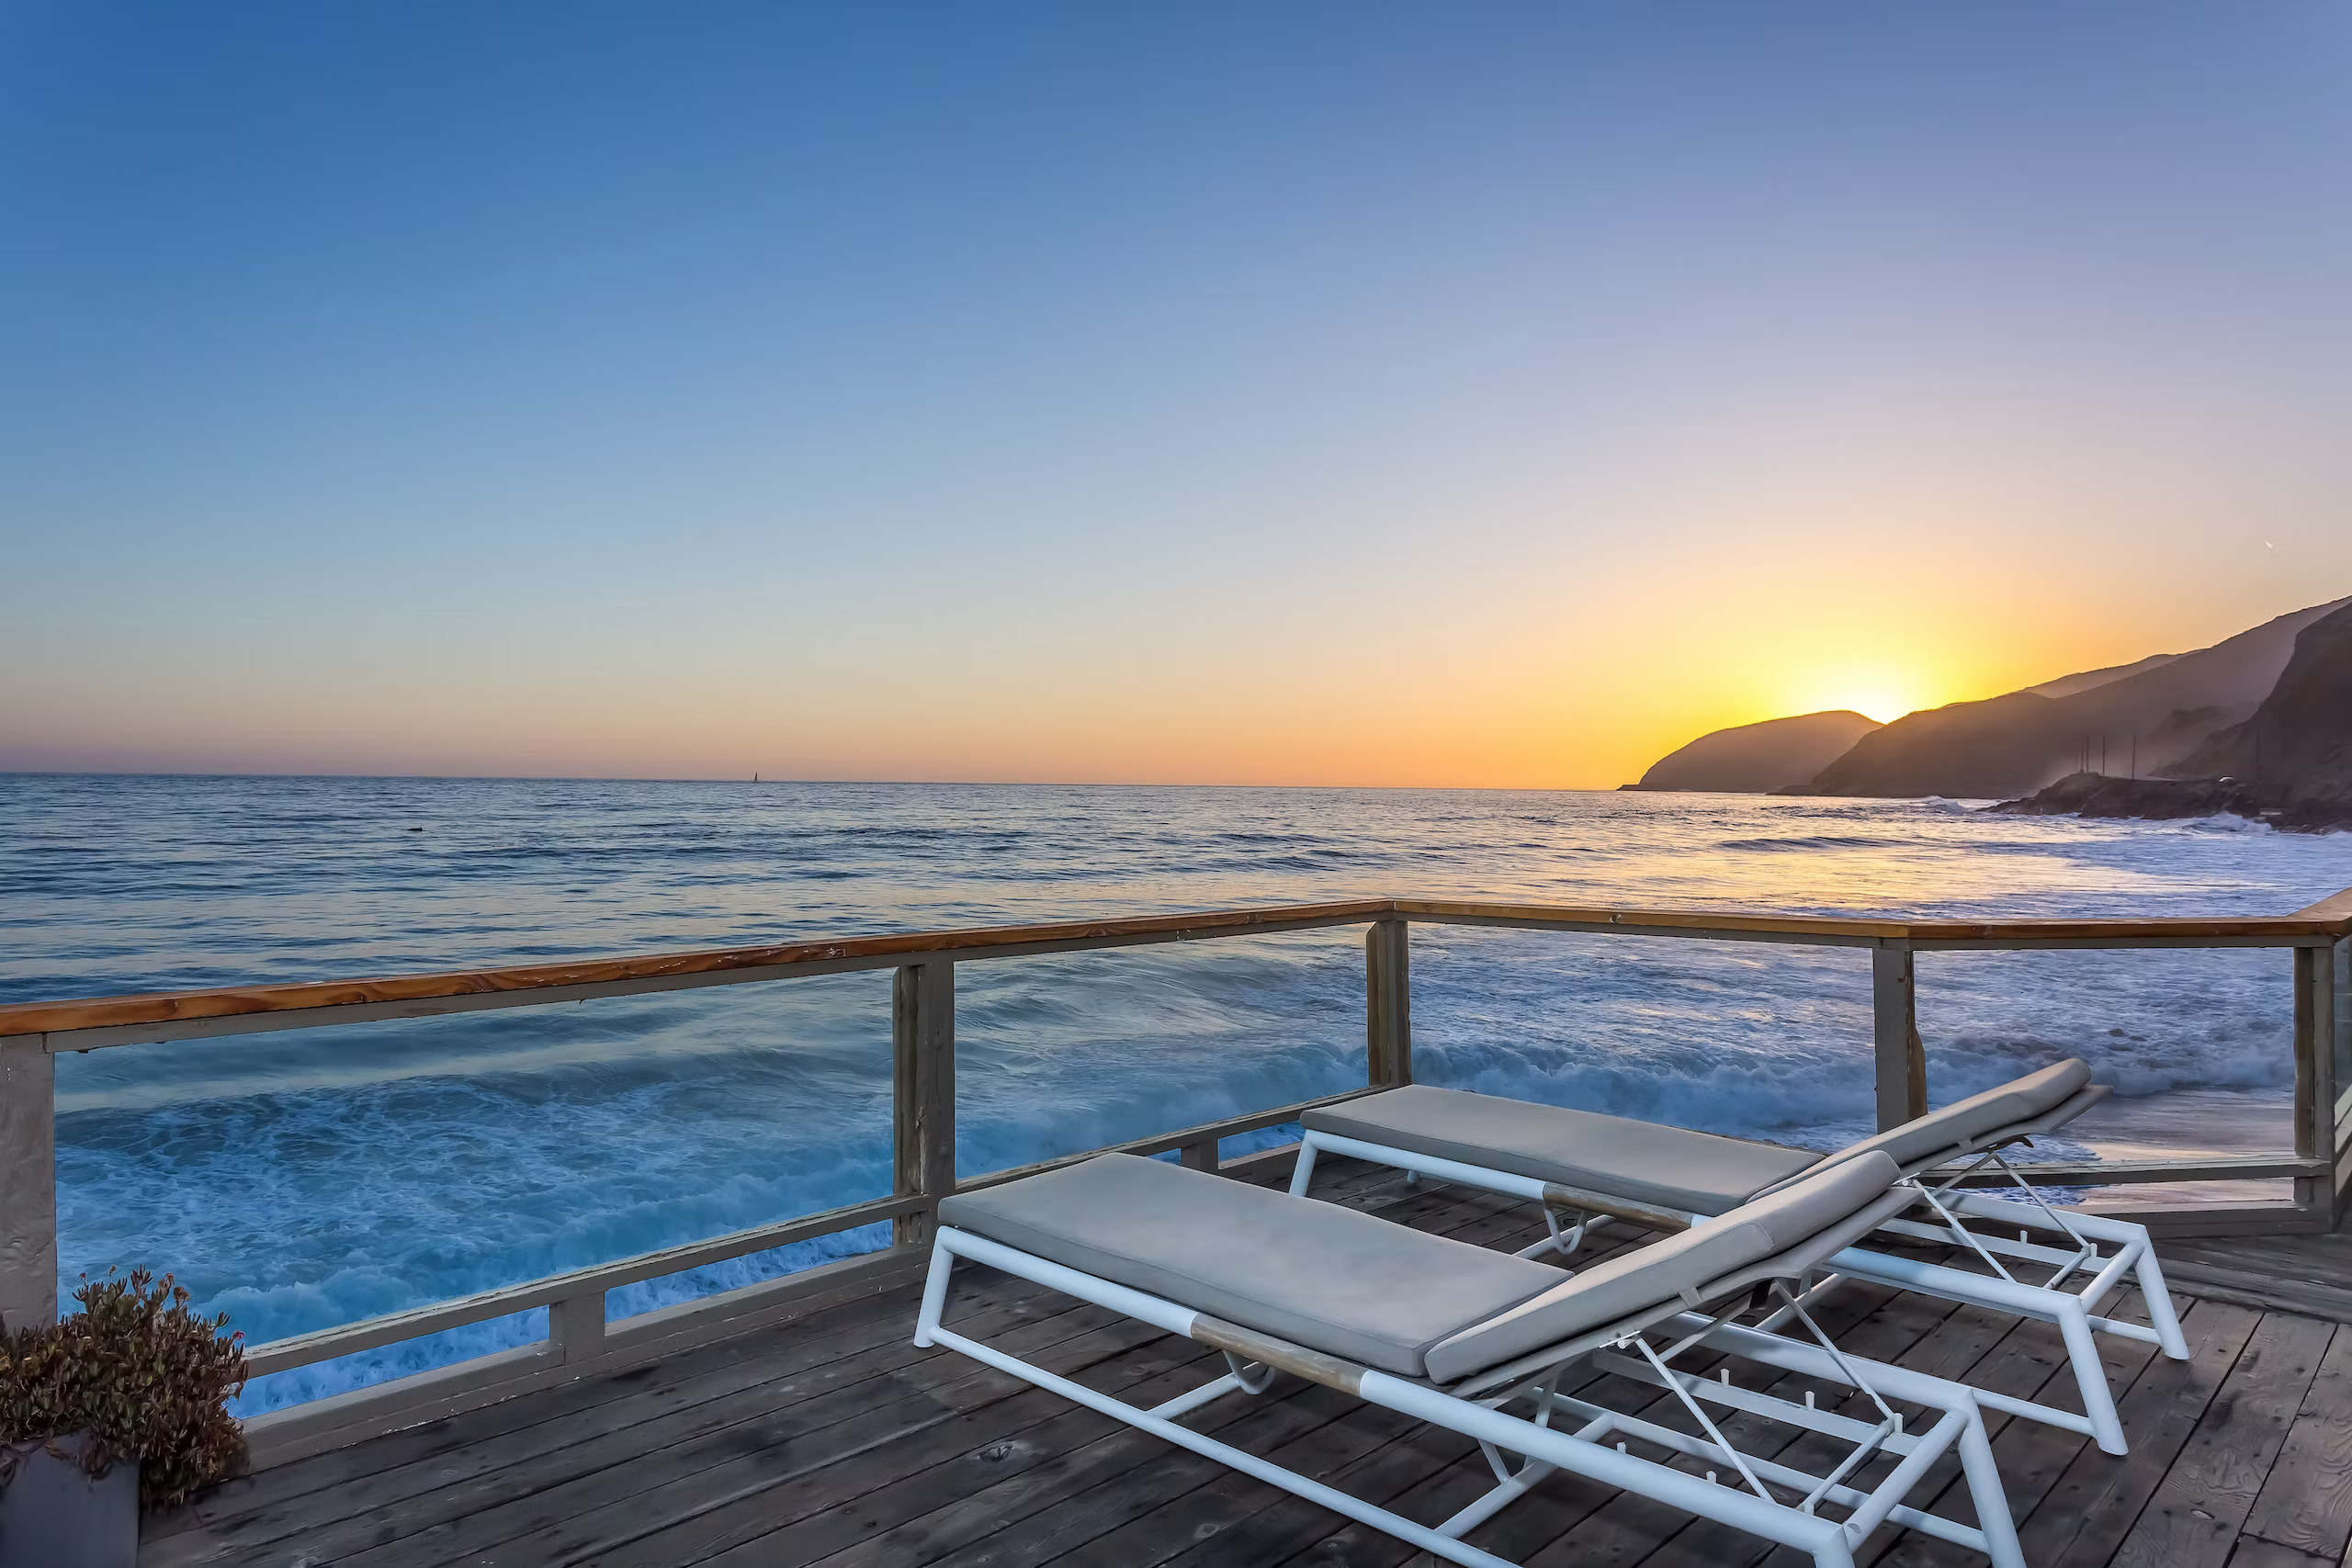 Sunset over the Pacific Ocean from the patio at Malibu California vacation rental home called Point Break.